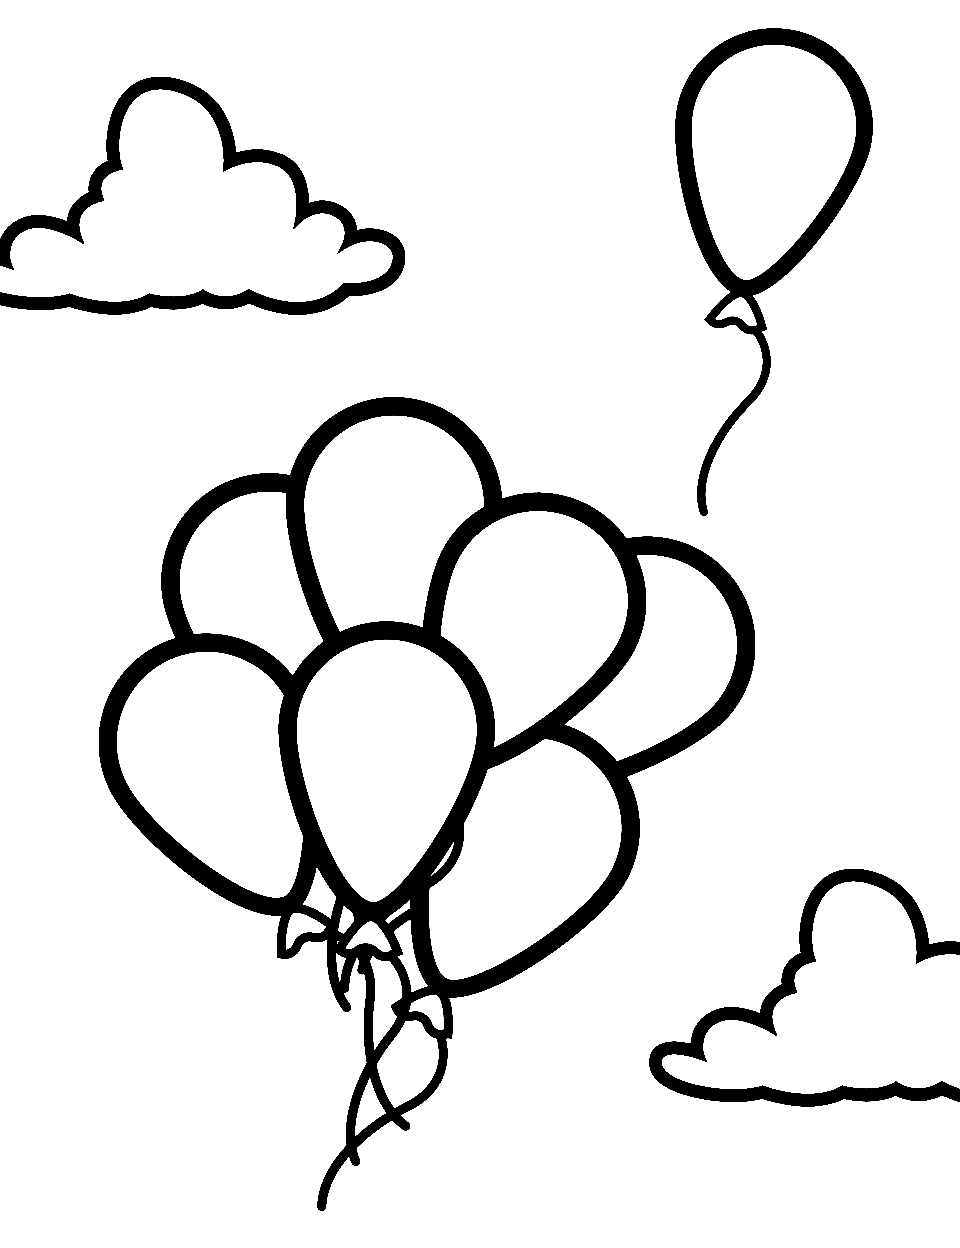 Balloon Bonanza Coloring Page - Bunches of balloons floating through the sky.